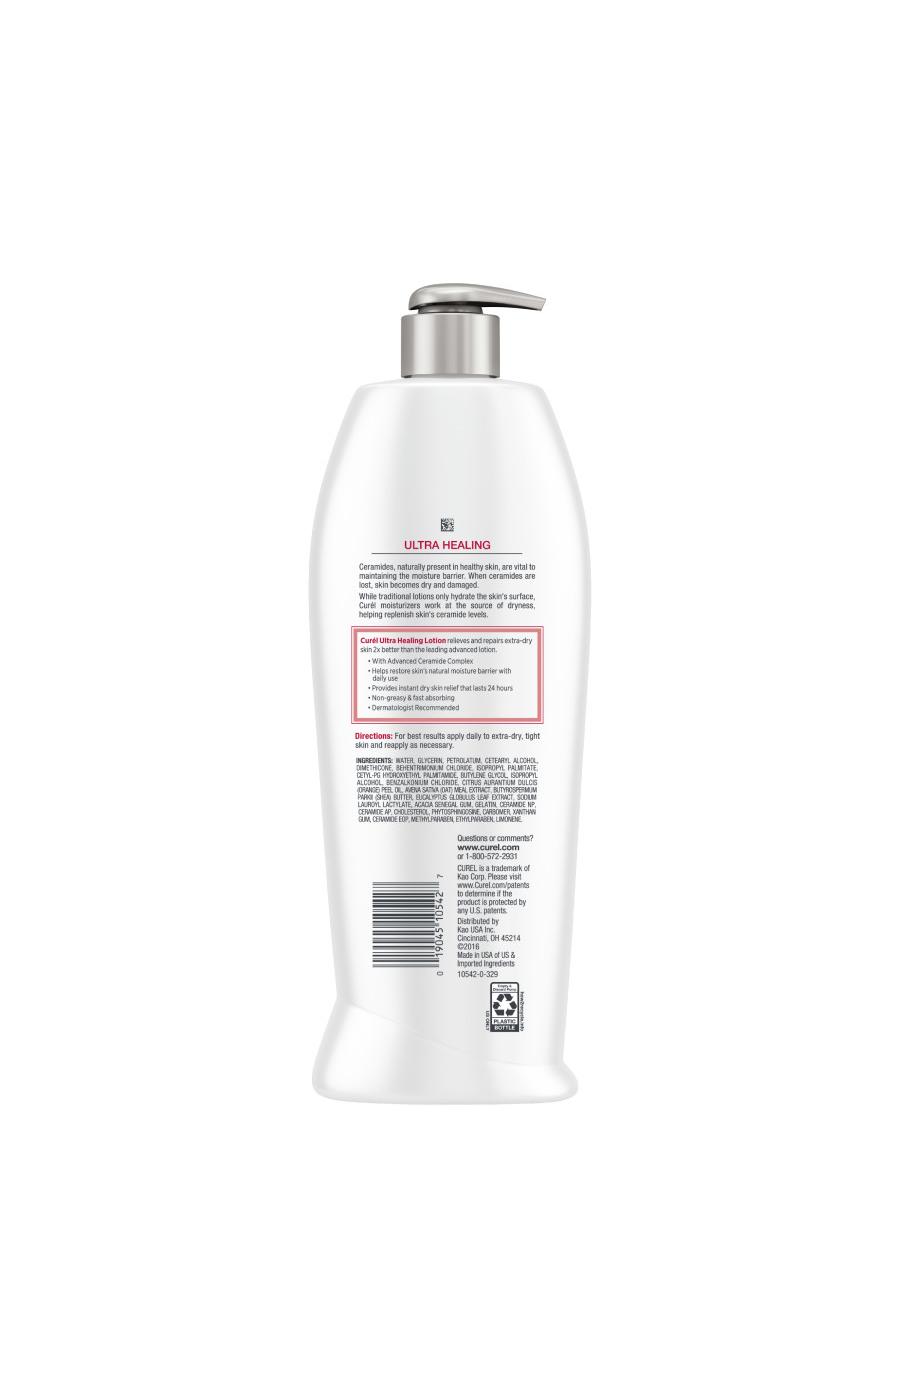 Curel Ultra Healing Lotion; image 4 of 16